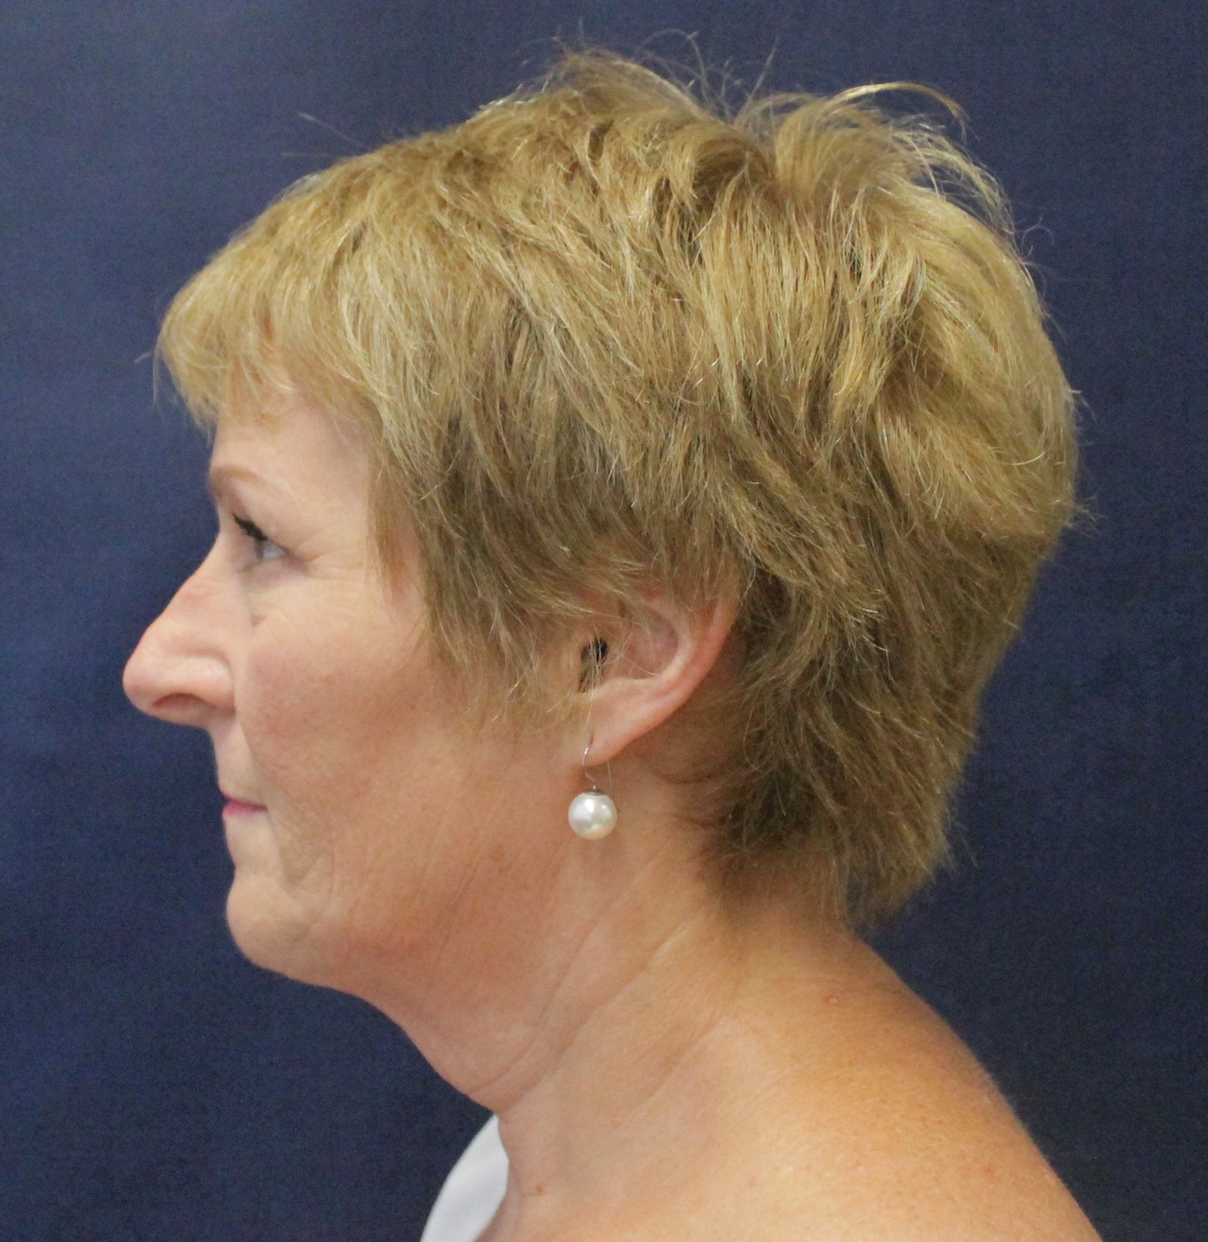 Neck Lift Before and After Results